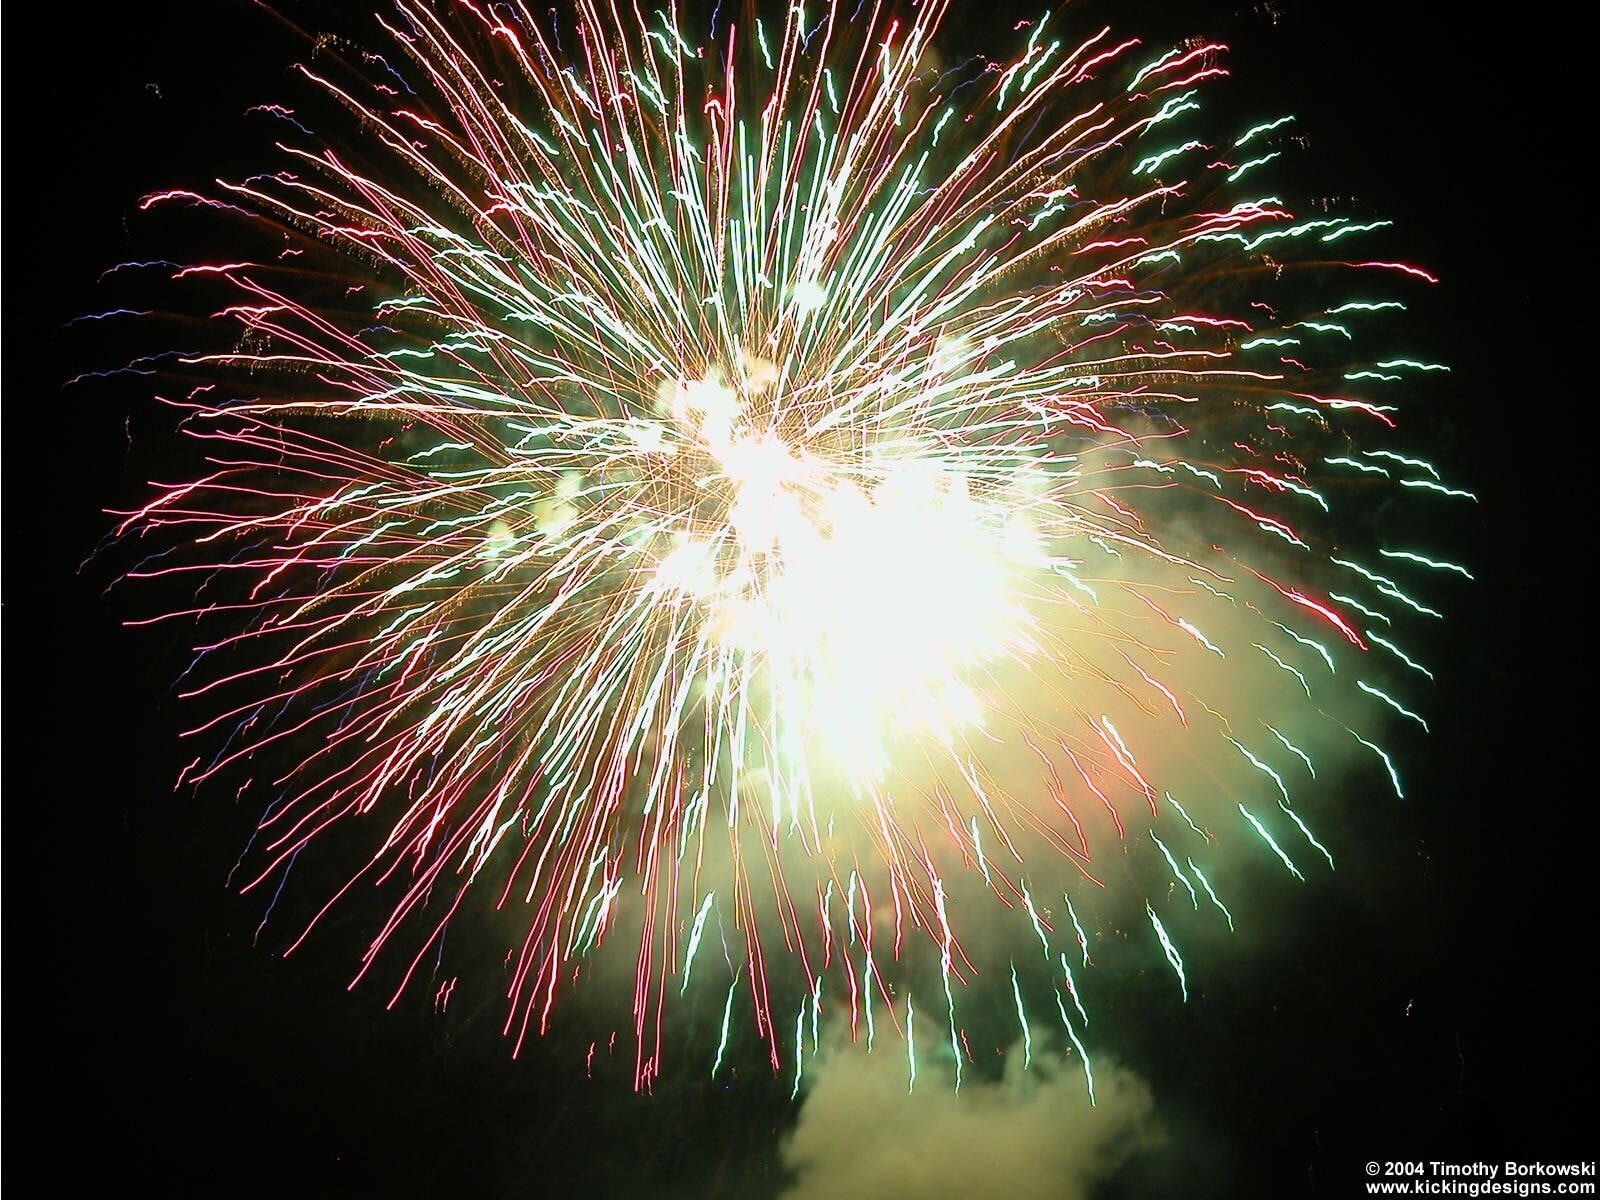 Generic 4th of July fireworks image